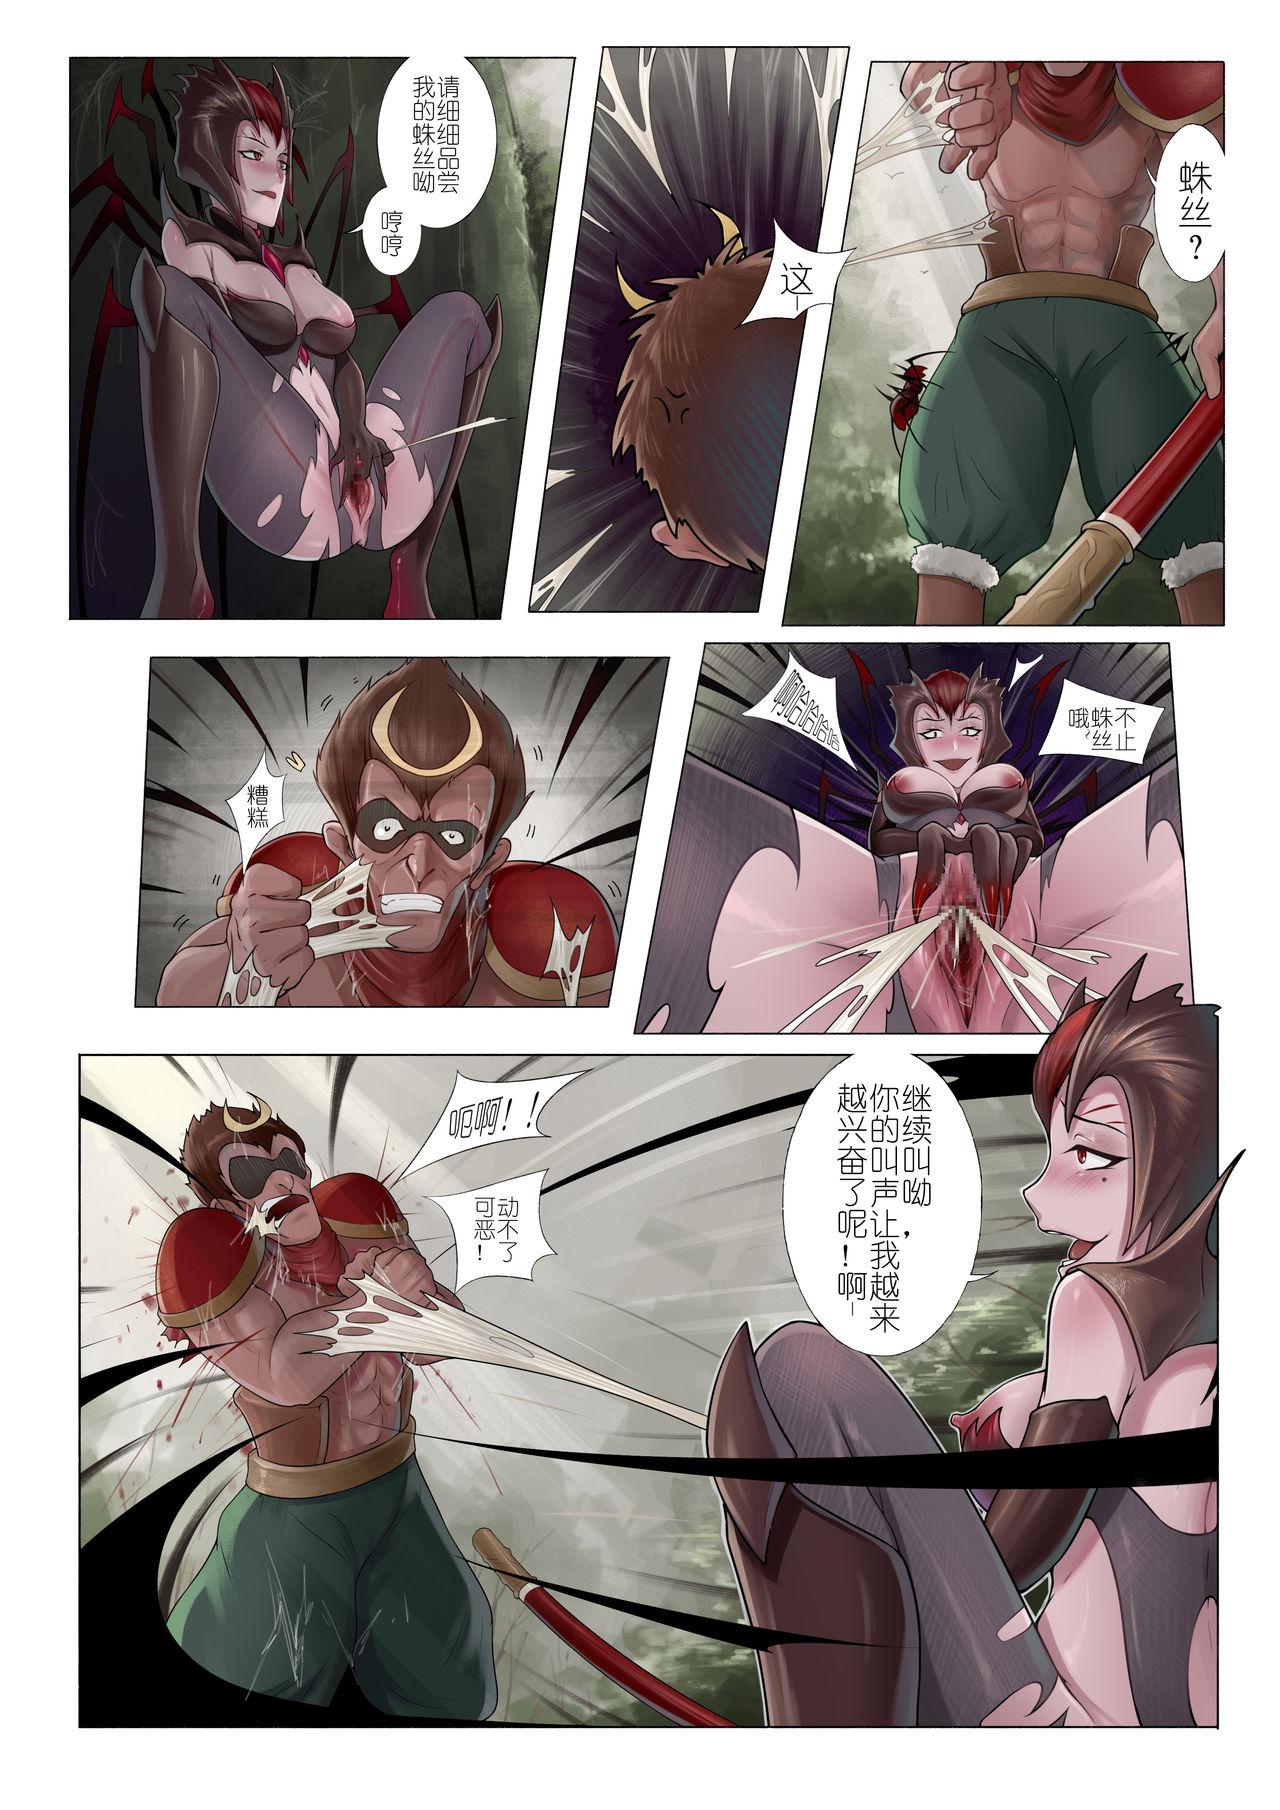 Gaping 恶女退治2蜘蛛女皇 - League of legends Farting - Page 5